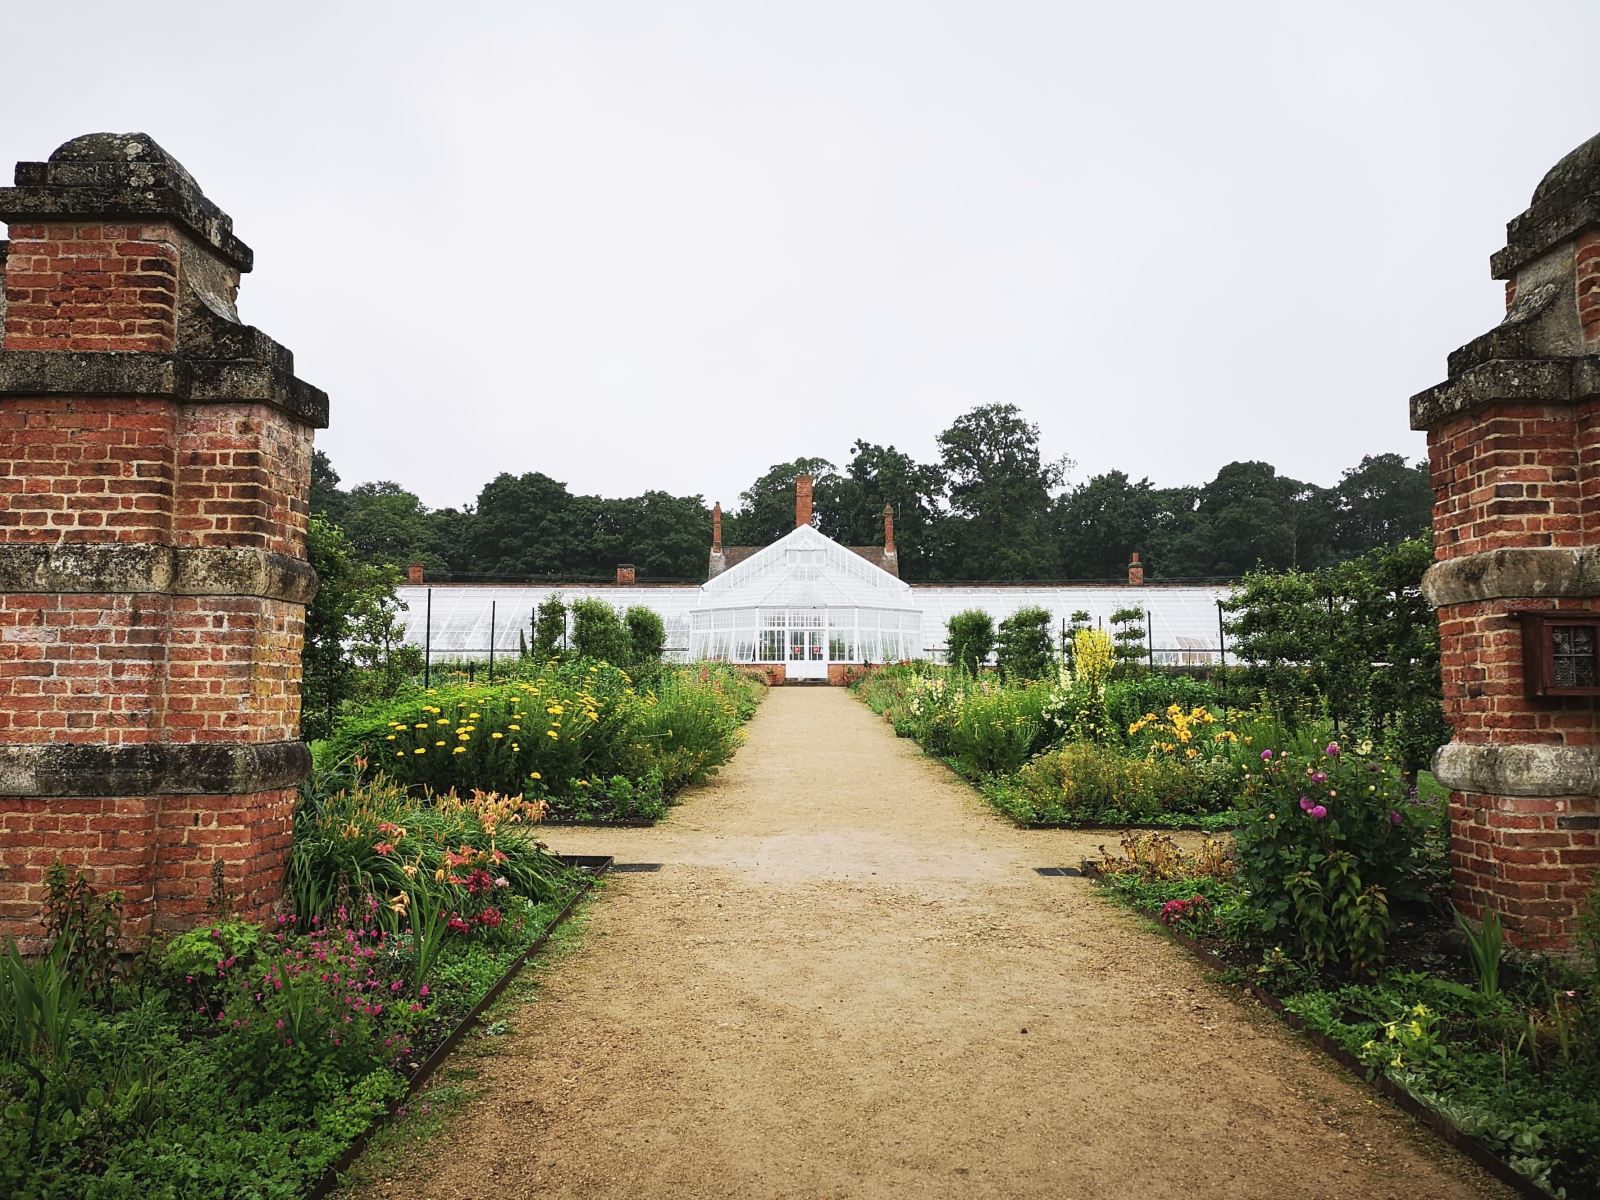 The walled garden at Clumber Park, Nottinghamshire. 